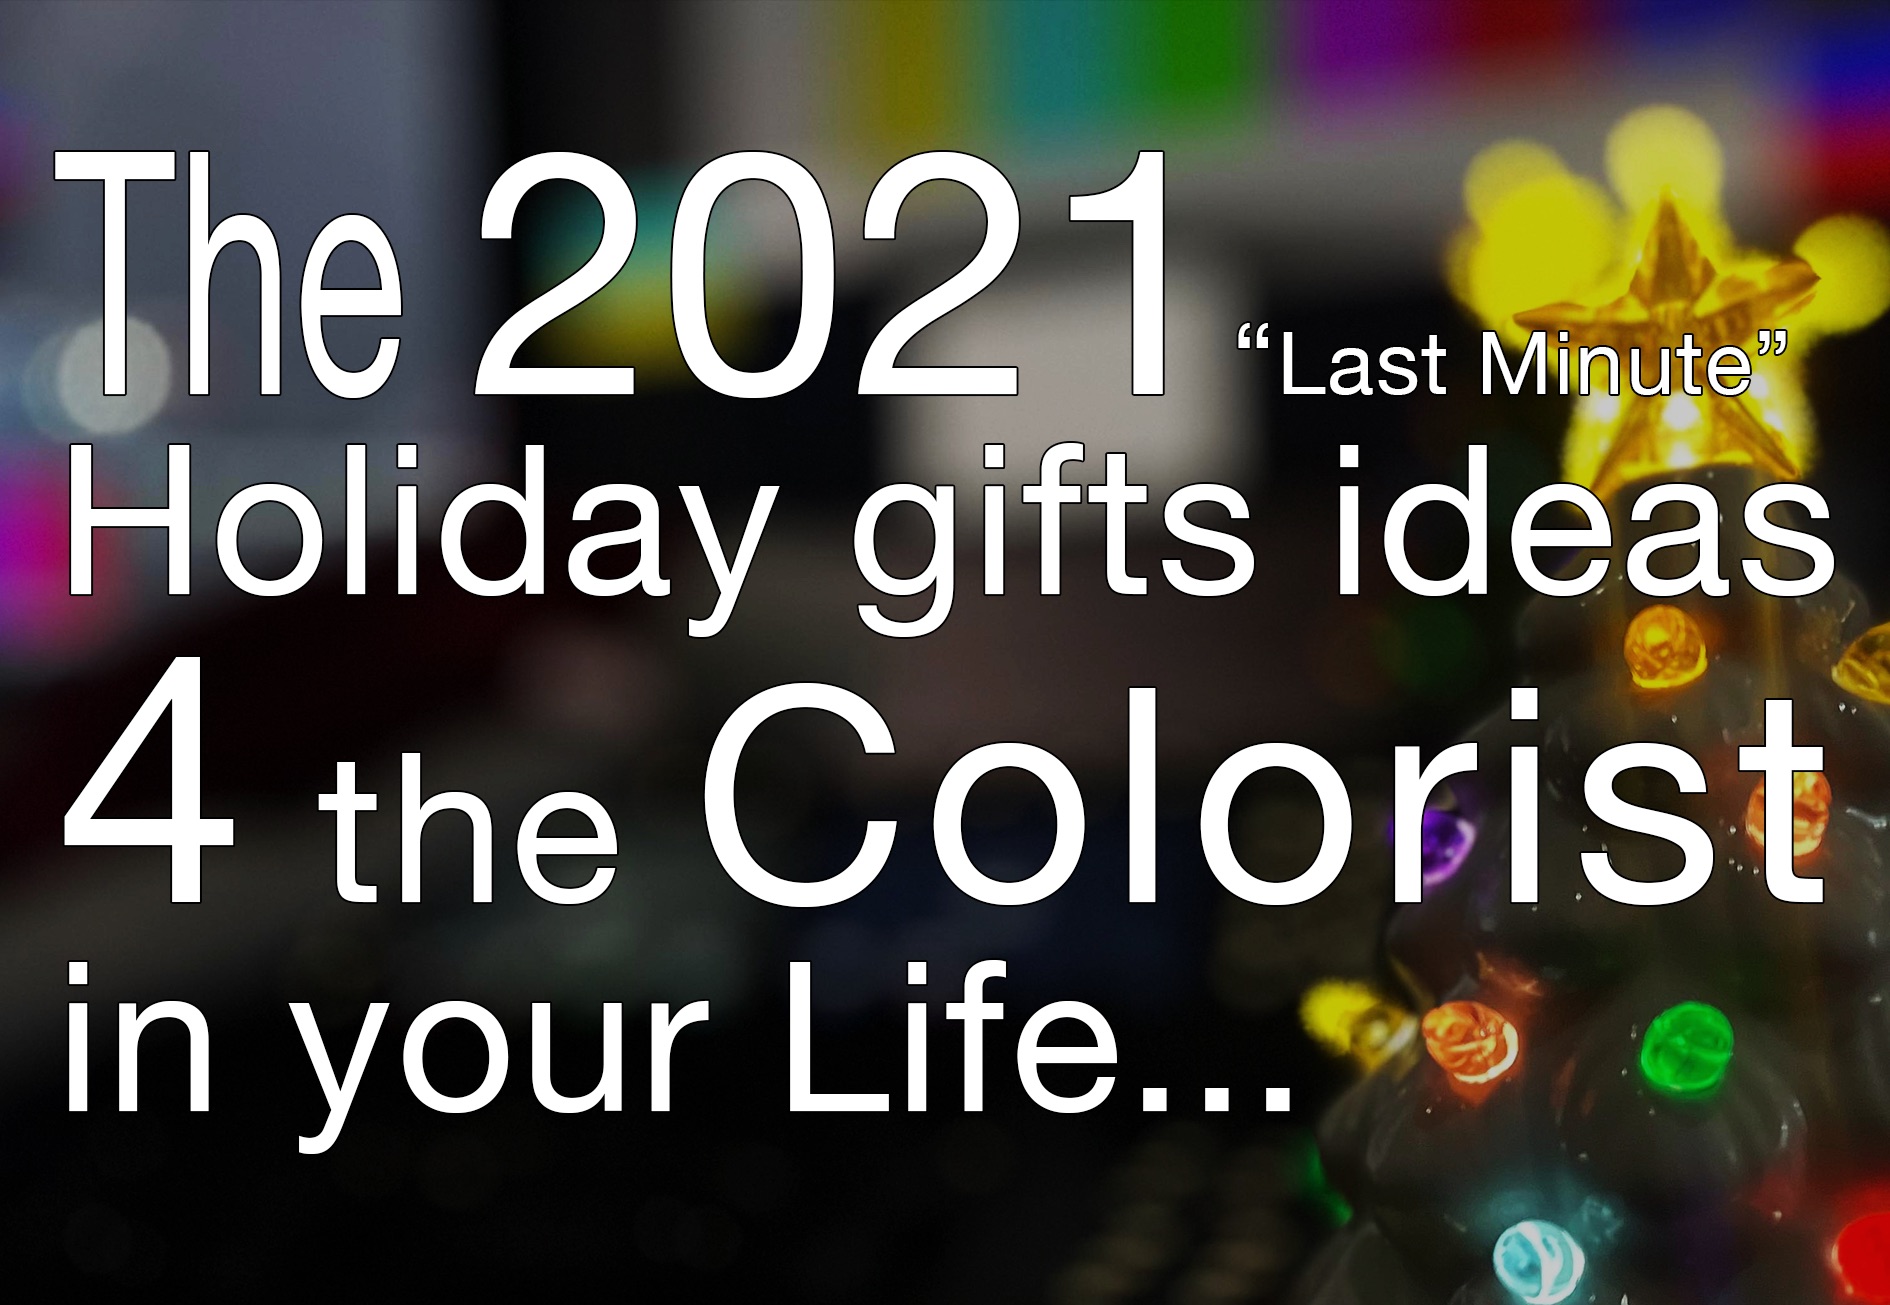 12 last-minute holiday gift ideas for the Colorist in your life 28